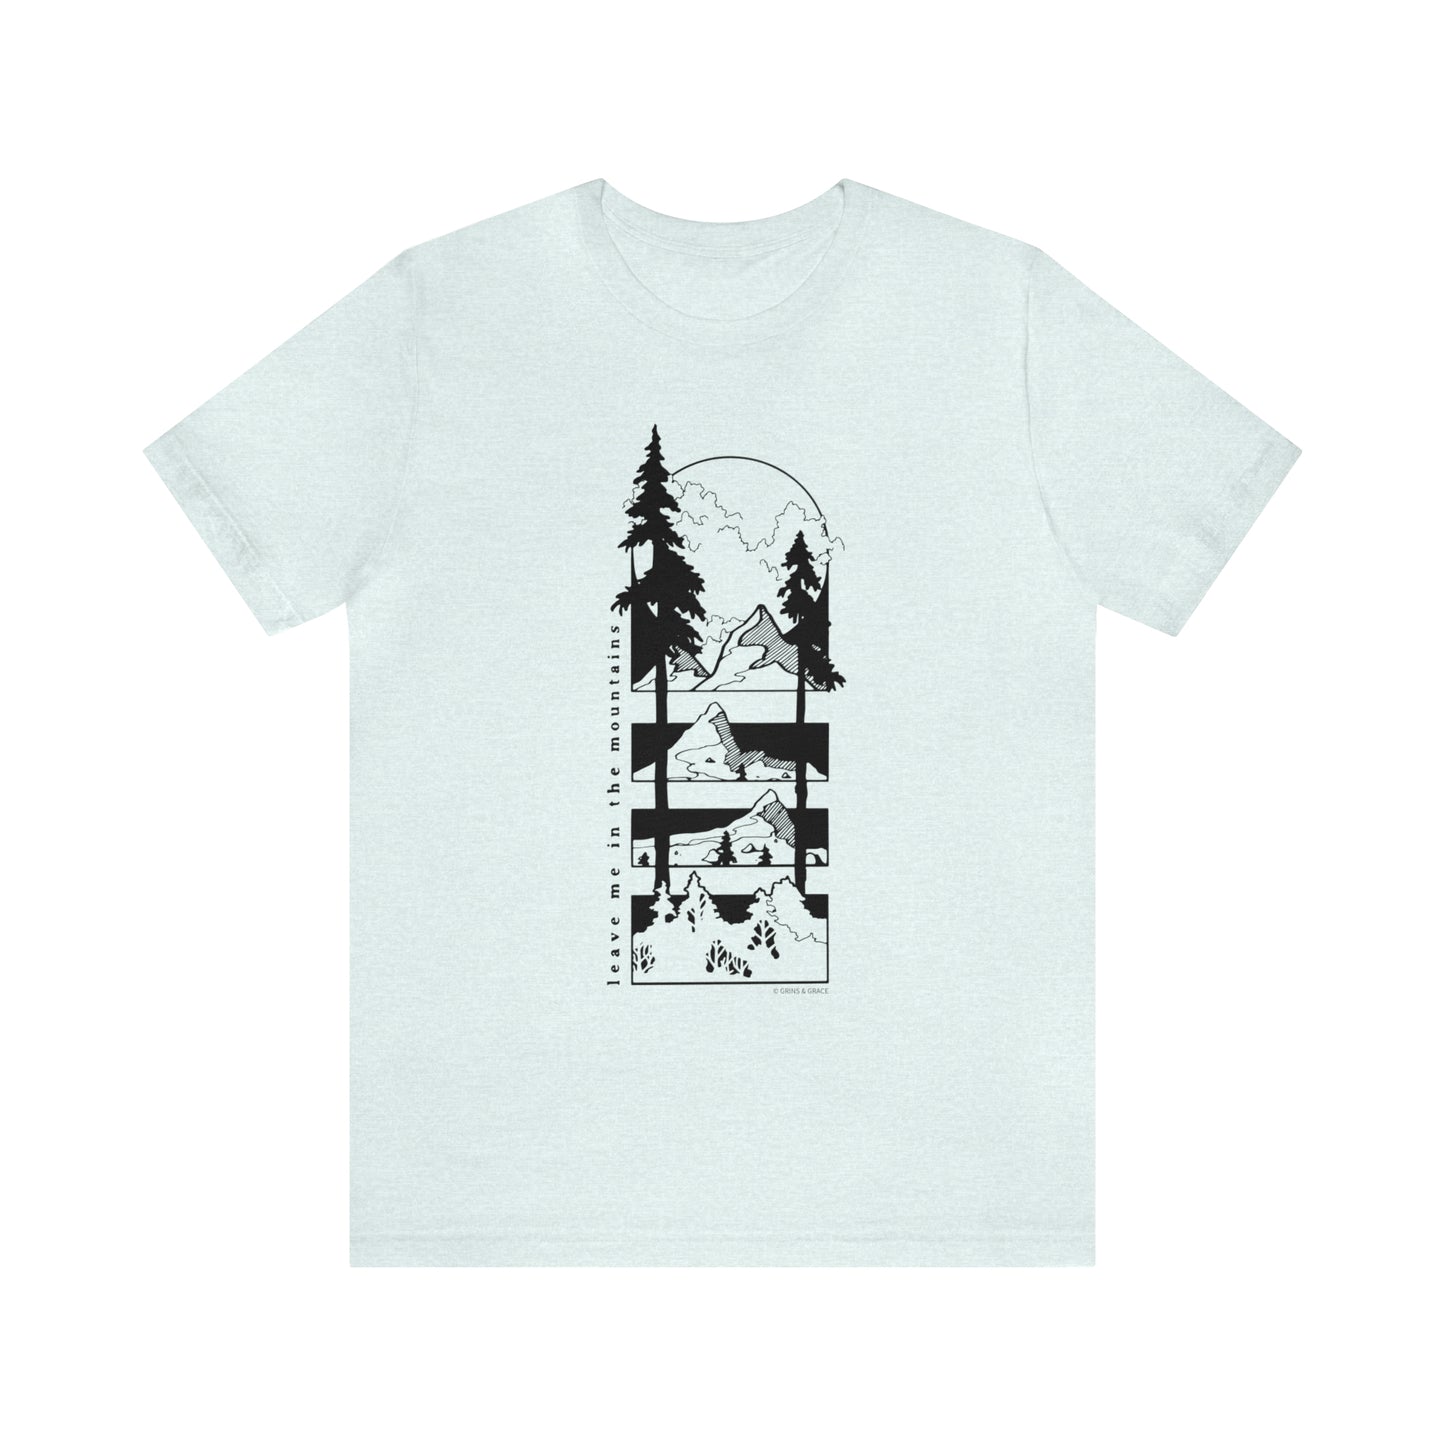 'LEAVE ME IN THE MOUNTAINS' UNISEX T-SHIRT